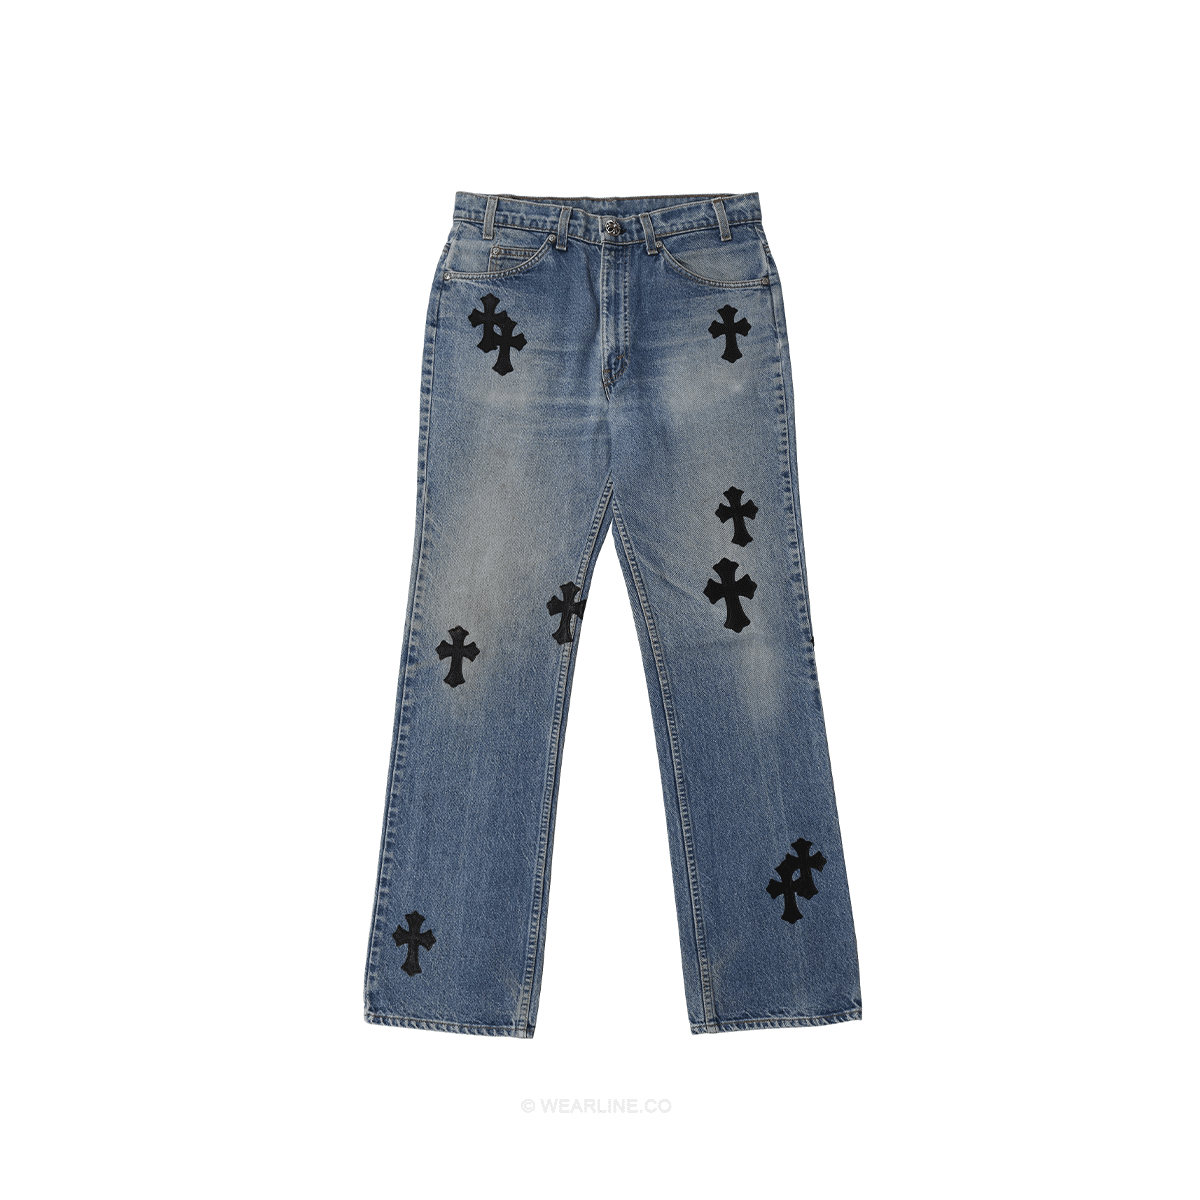 CHROME HEARTS LIGHT BLUE DENIM JEANS IN BLACK LEATHER CROSS PATCH